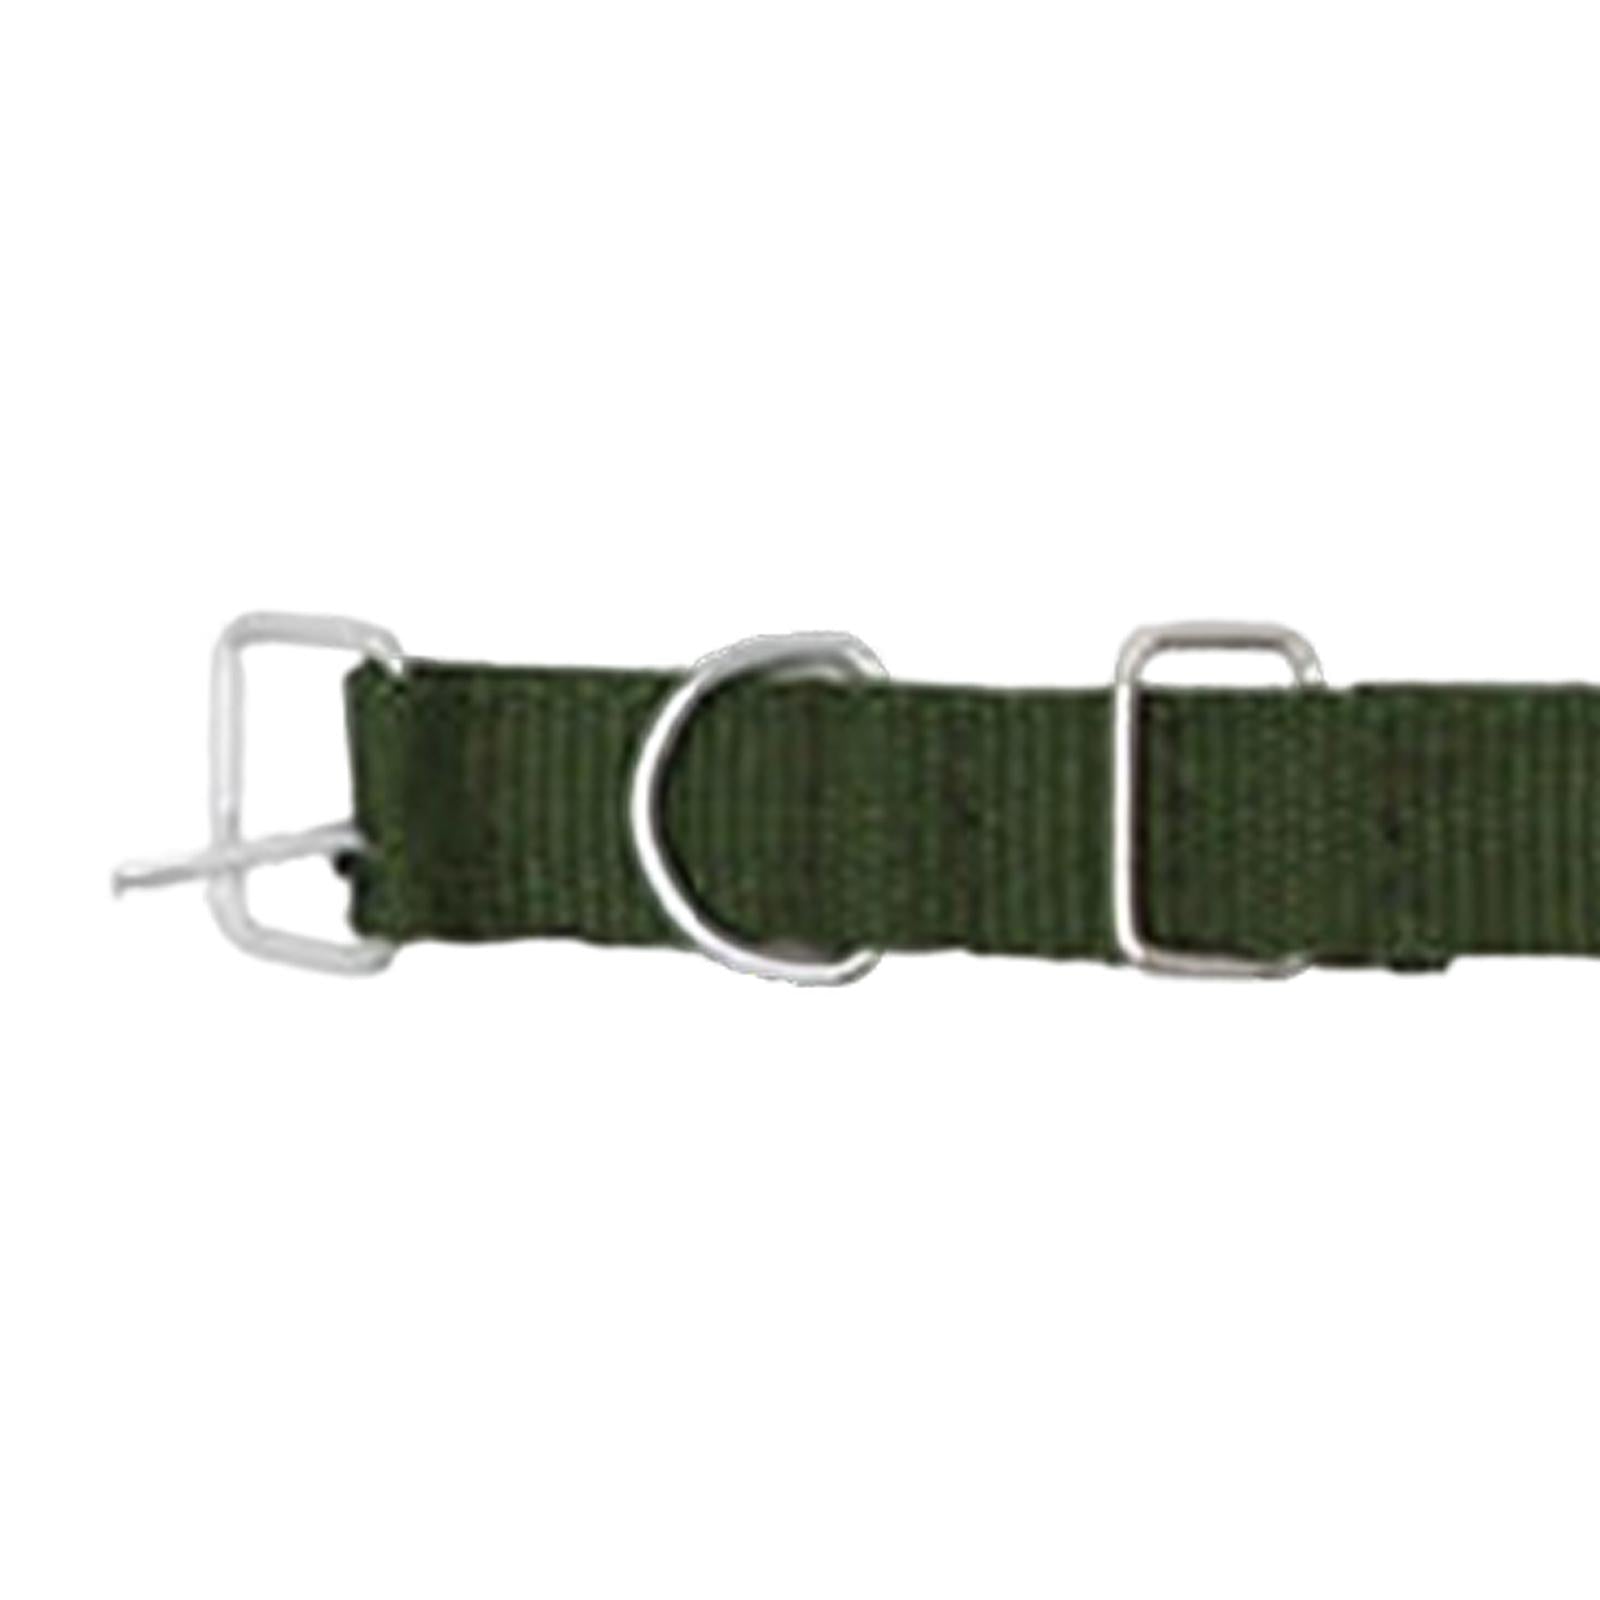 Portable Cow Neck Strap Thicken Sturdy Canvas for Farm Animal Sheep Horse 20in